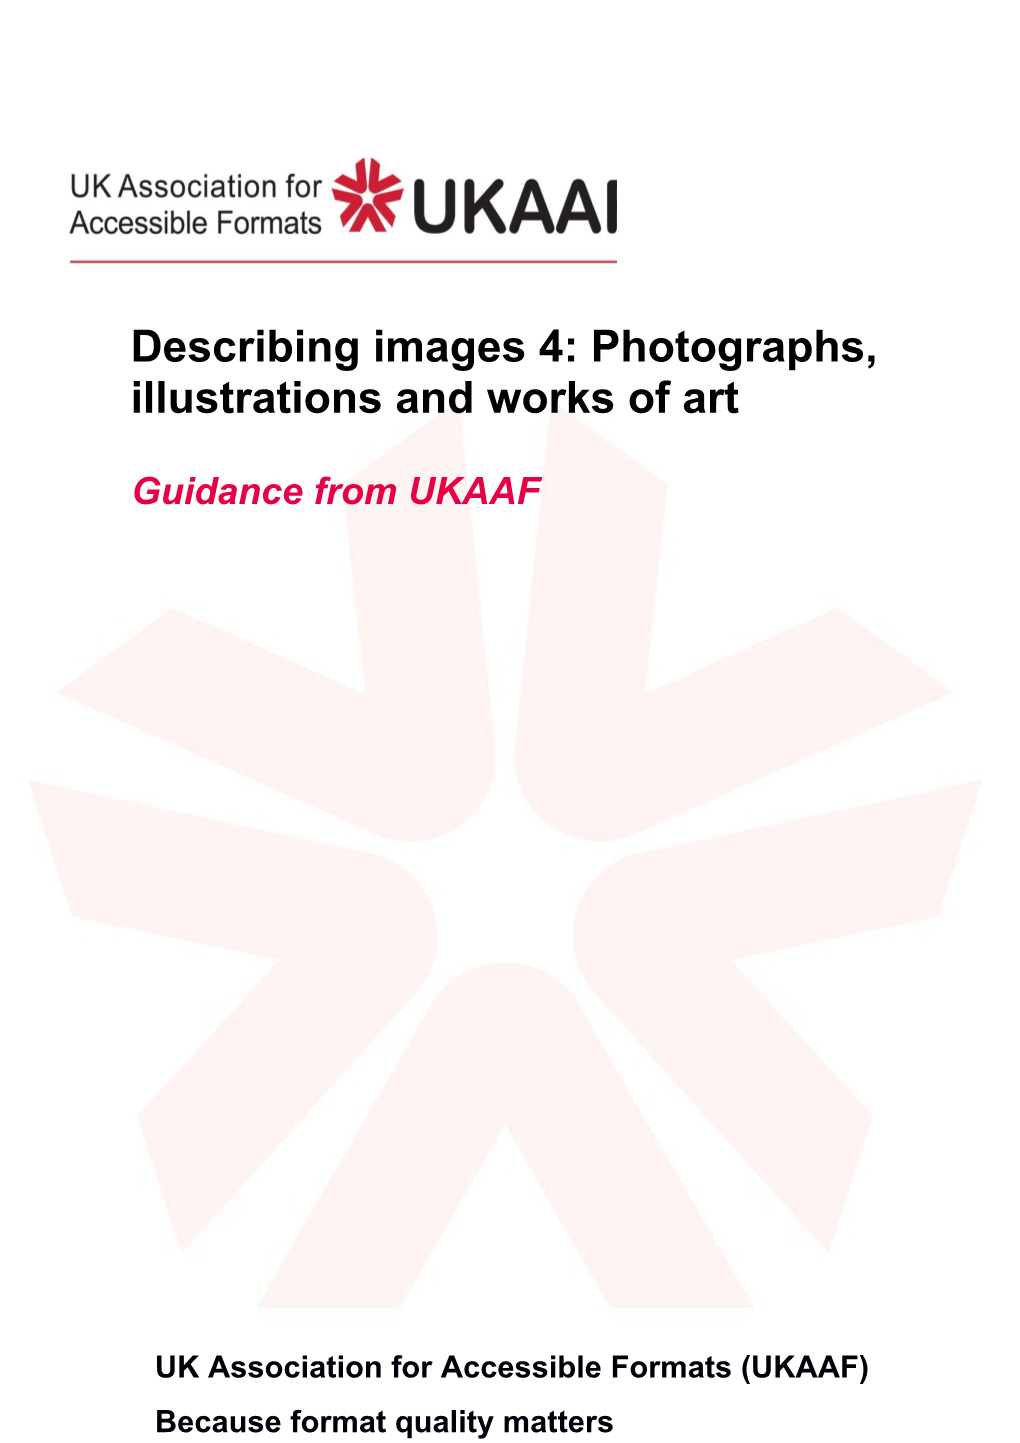 G016 Describing Images 4: Photographs, Illustrations and Works of Art